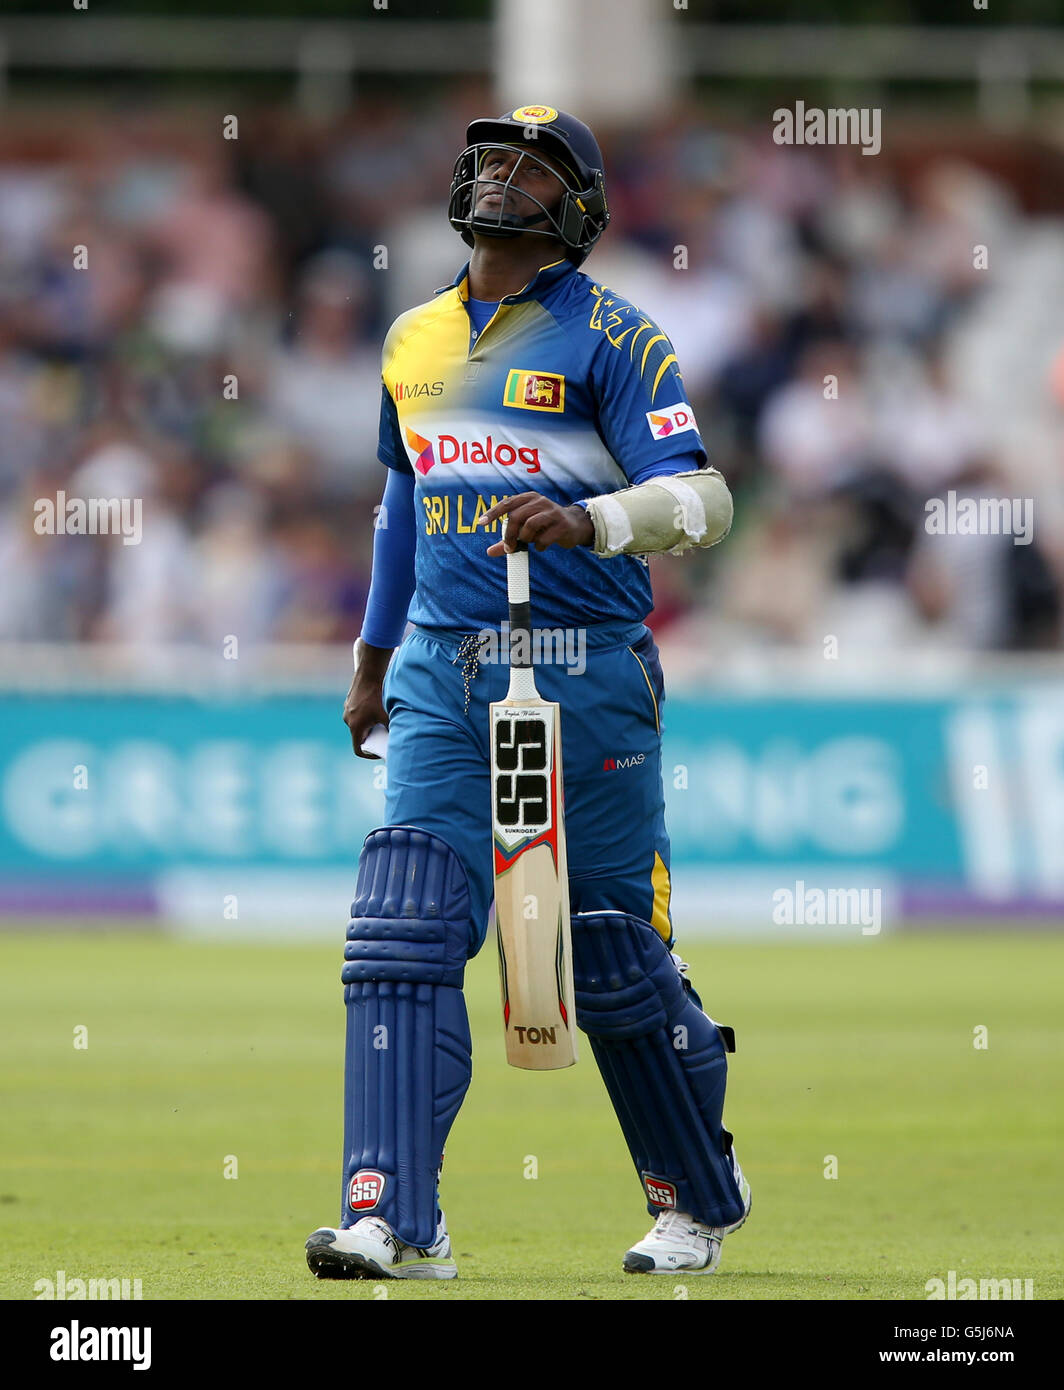 Sri Lanka's Angelo Mathews walks off after being dismissed during the First One Day International at Trent Bridge, Nottingham. Stock Photo